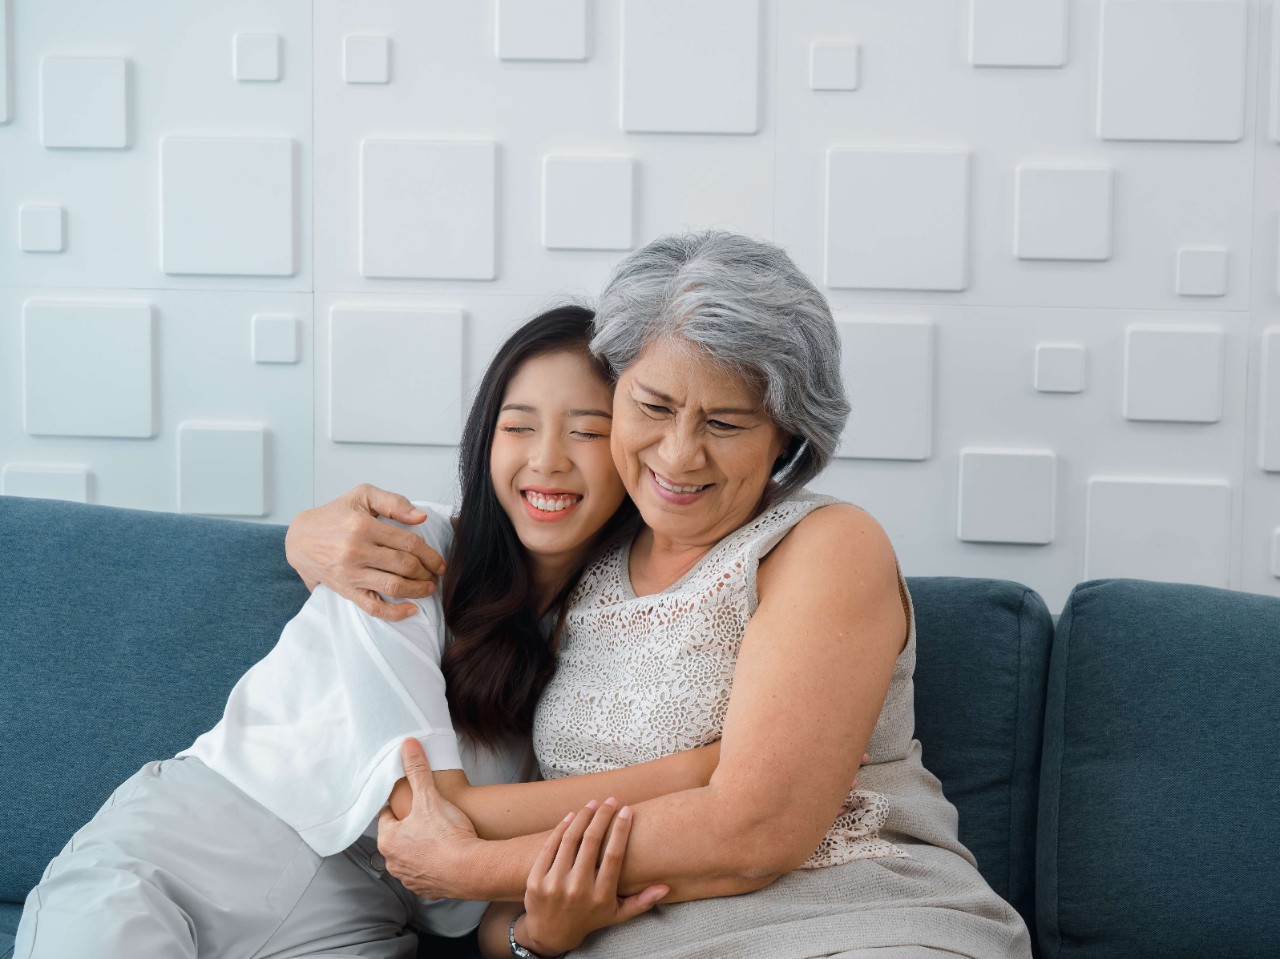 Elderly woman tenderly hugging younger woman